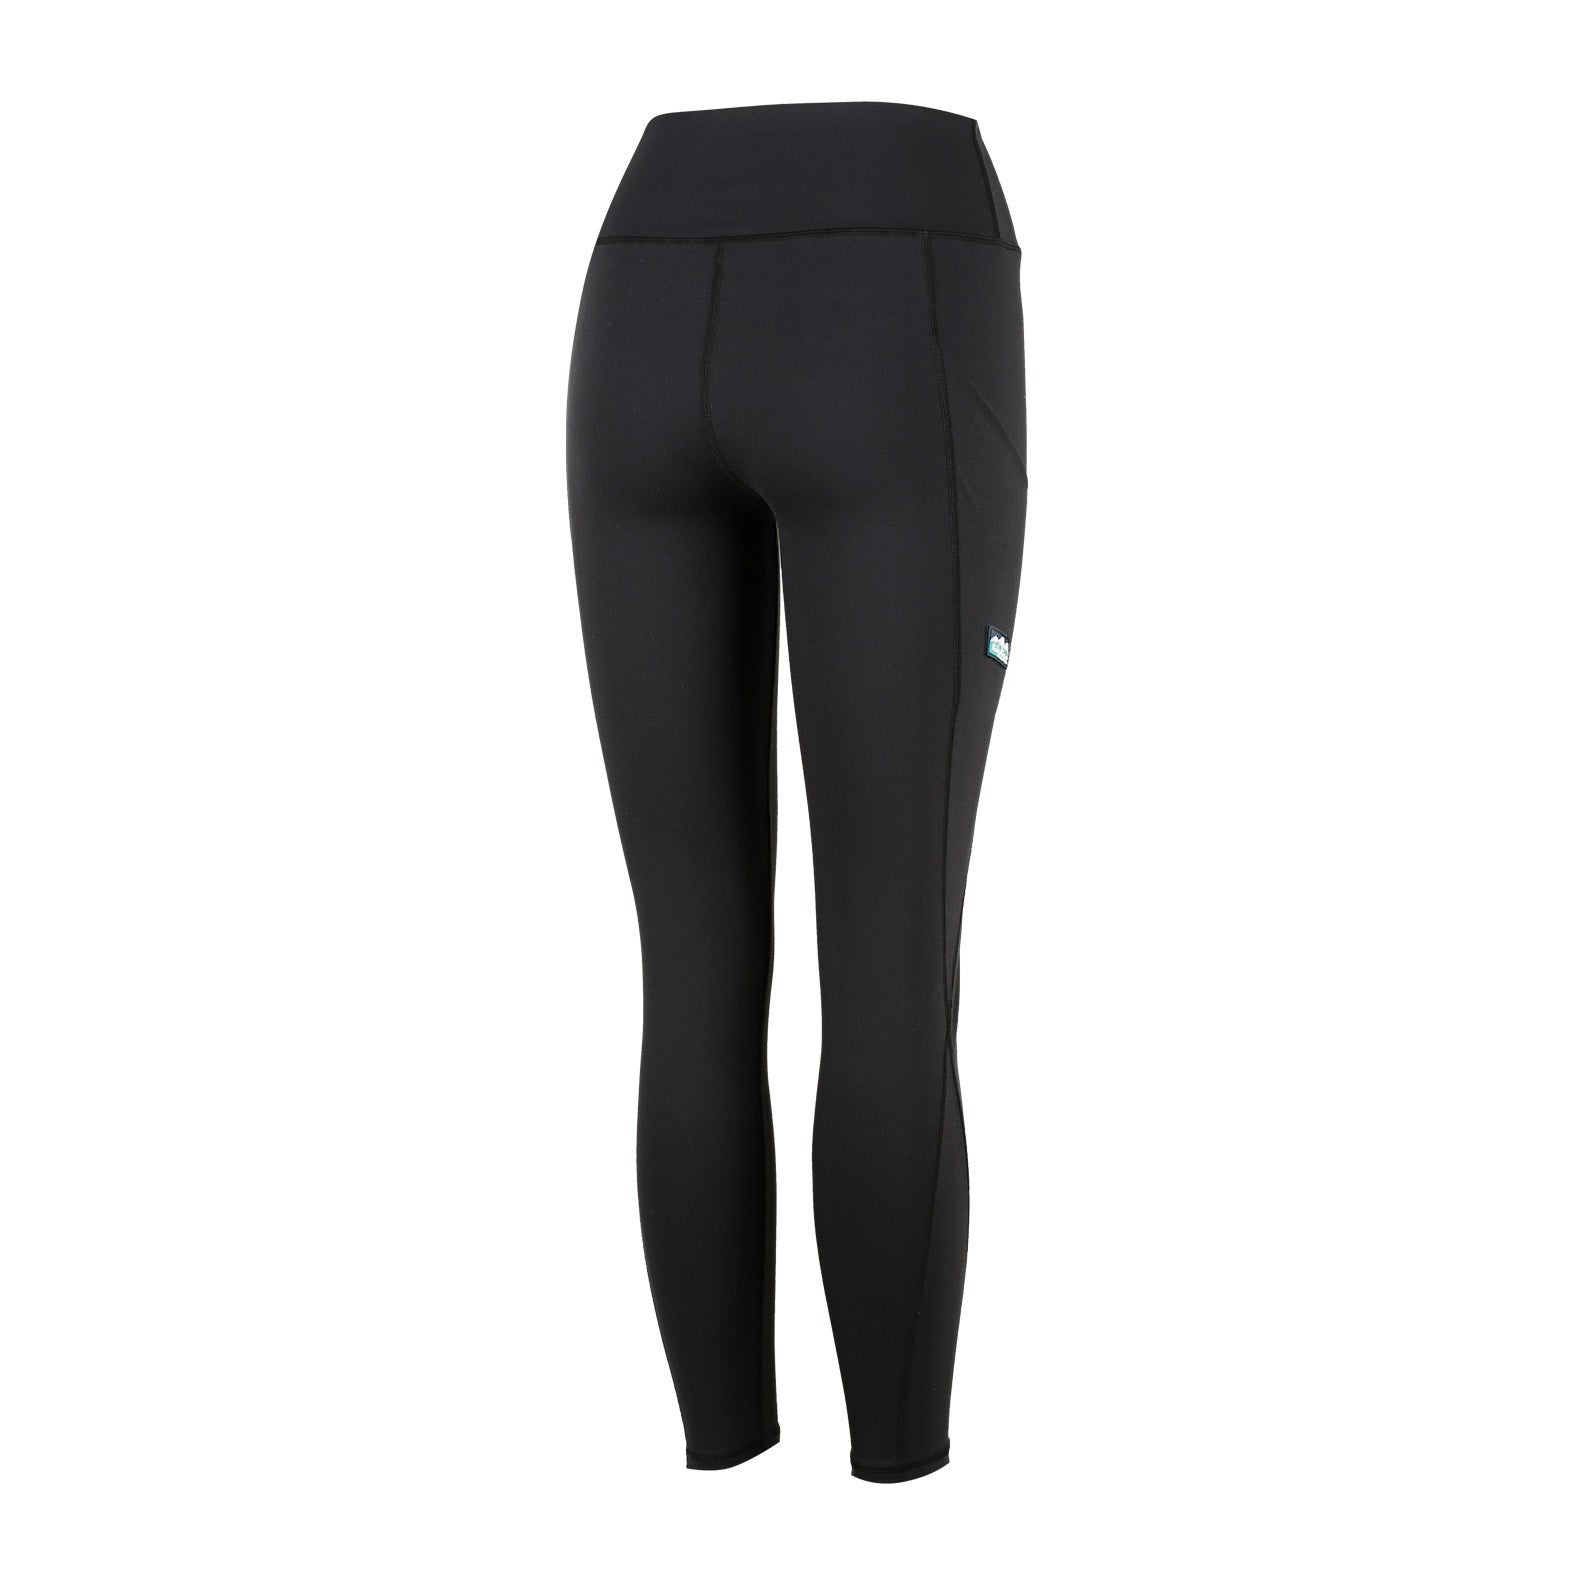 Comfort Plus!  Black & Grey Ladies Riding Tights with Phone Pockets